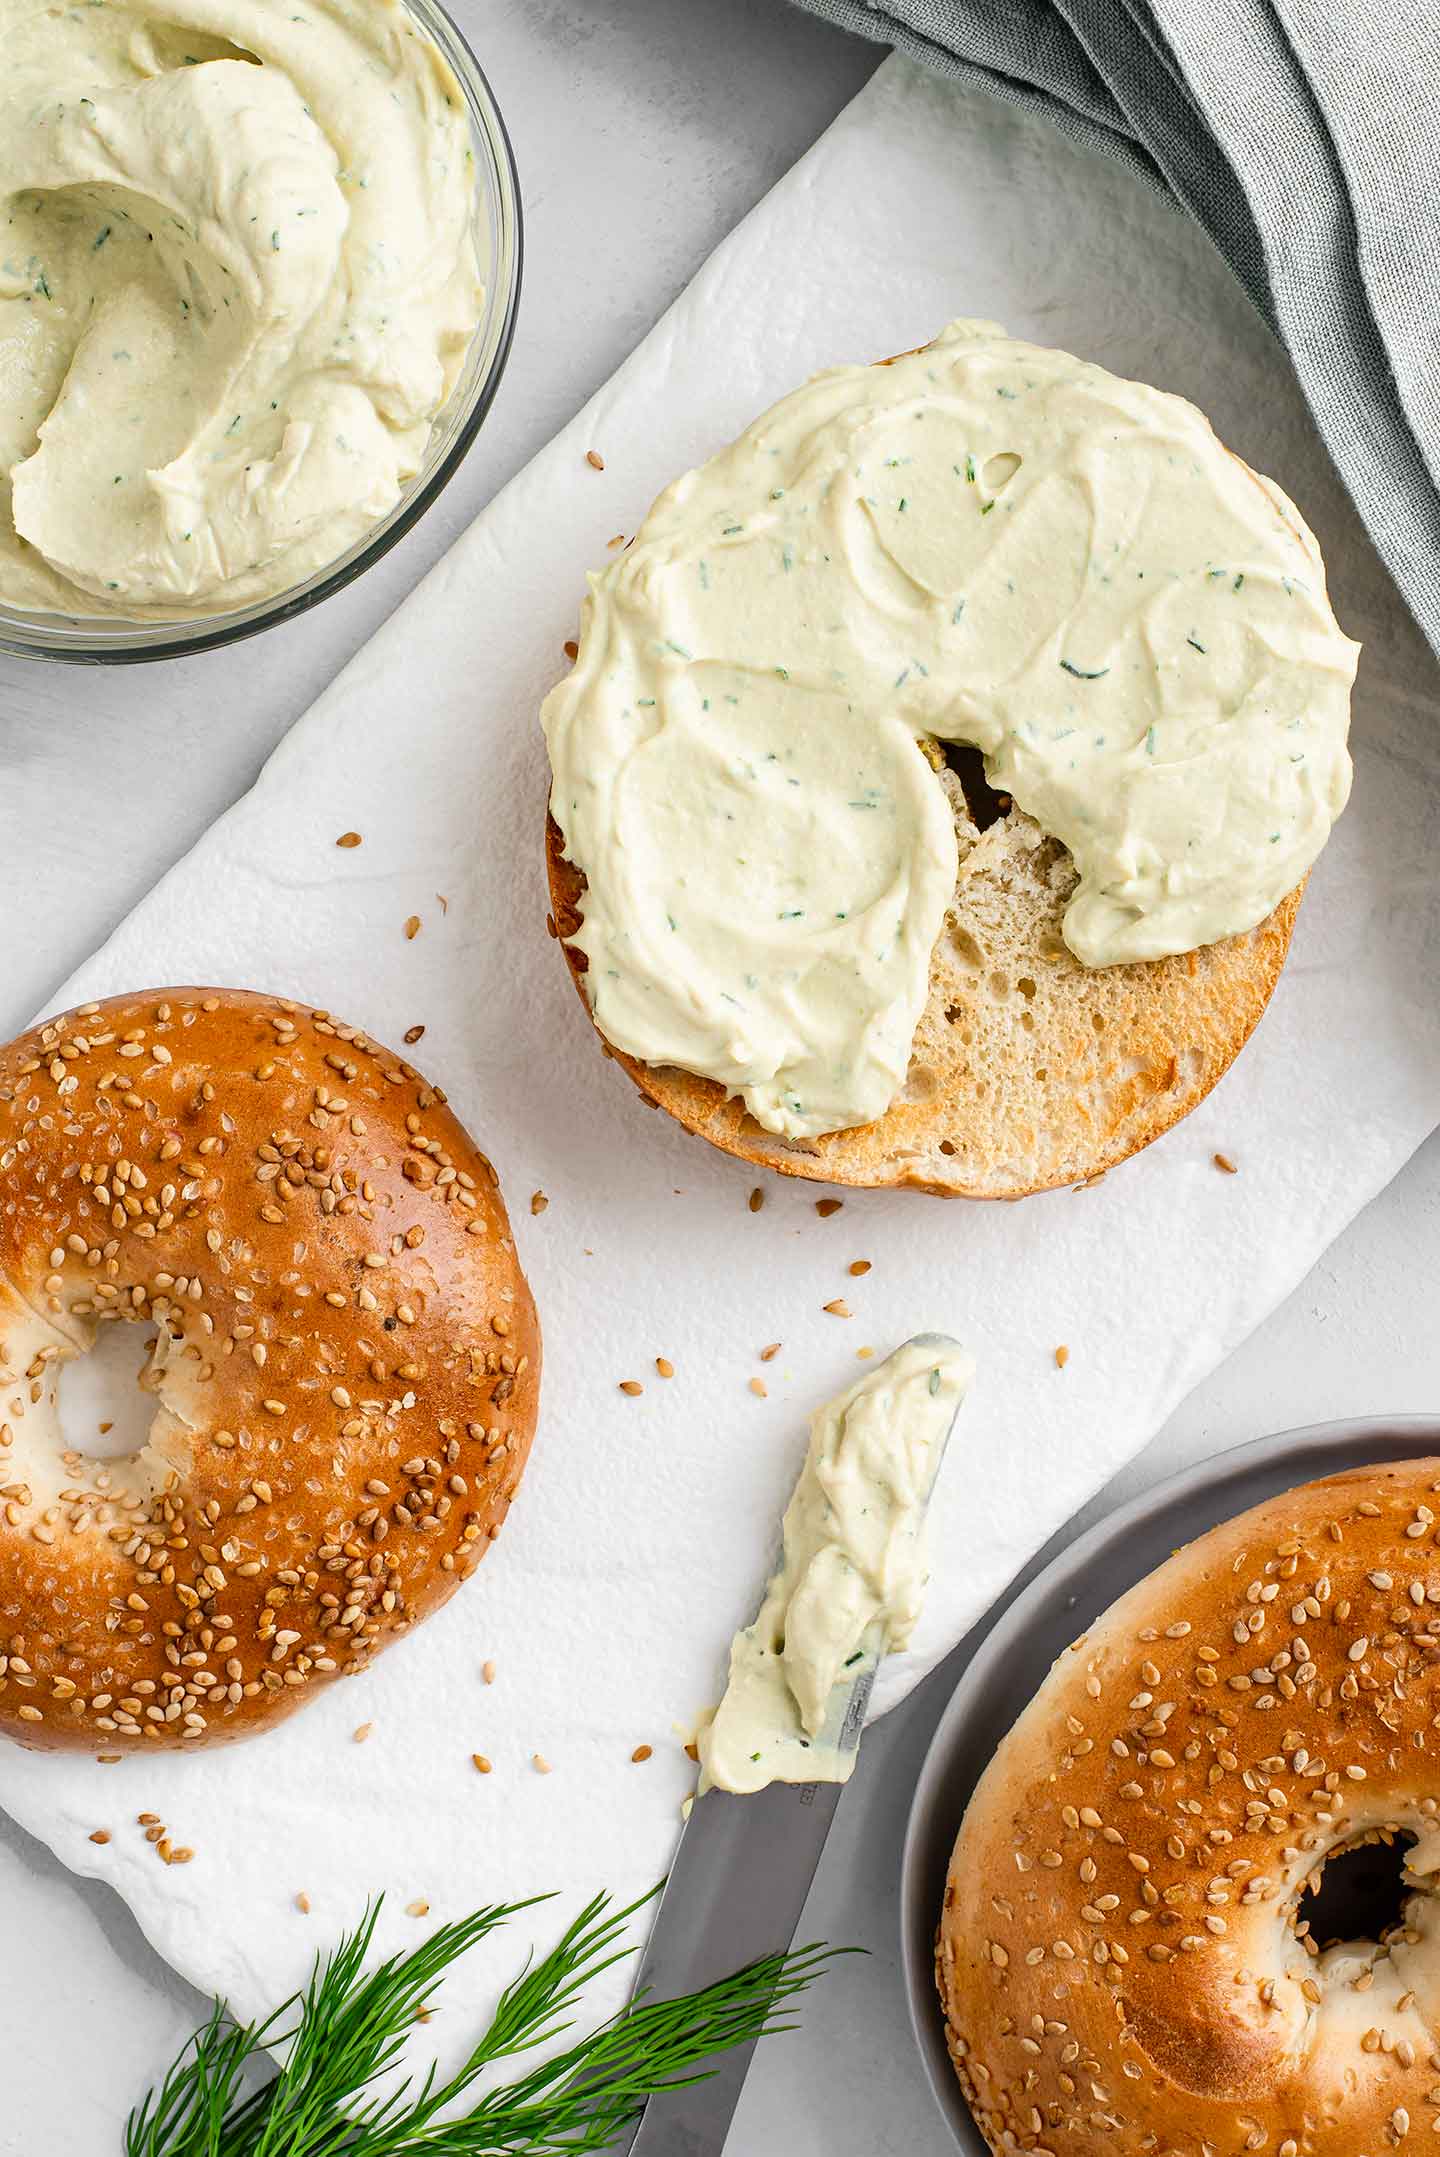 Top down view of creamy dill spread on half of a toasted sesame bagel. The other half lays on a tray next to it, a knife is covered in the creamy spread and more spread in a small bowl.